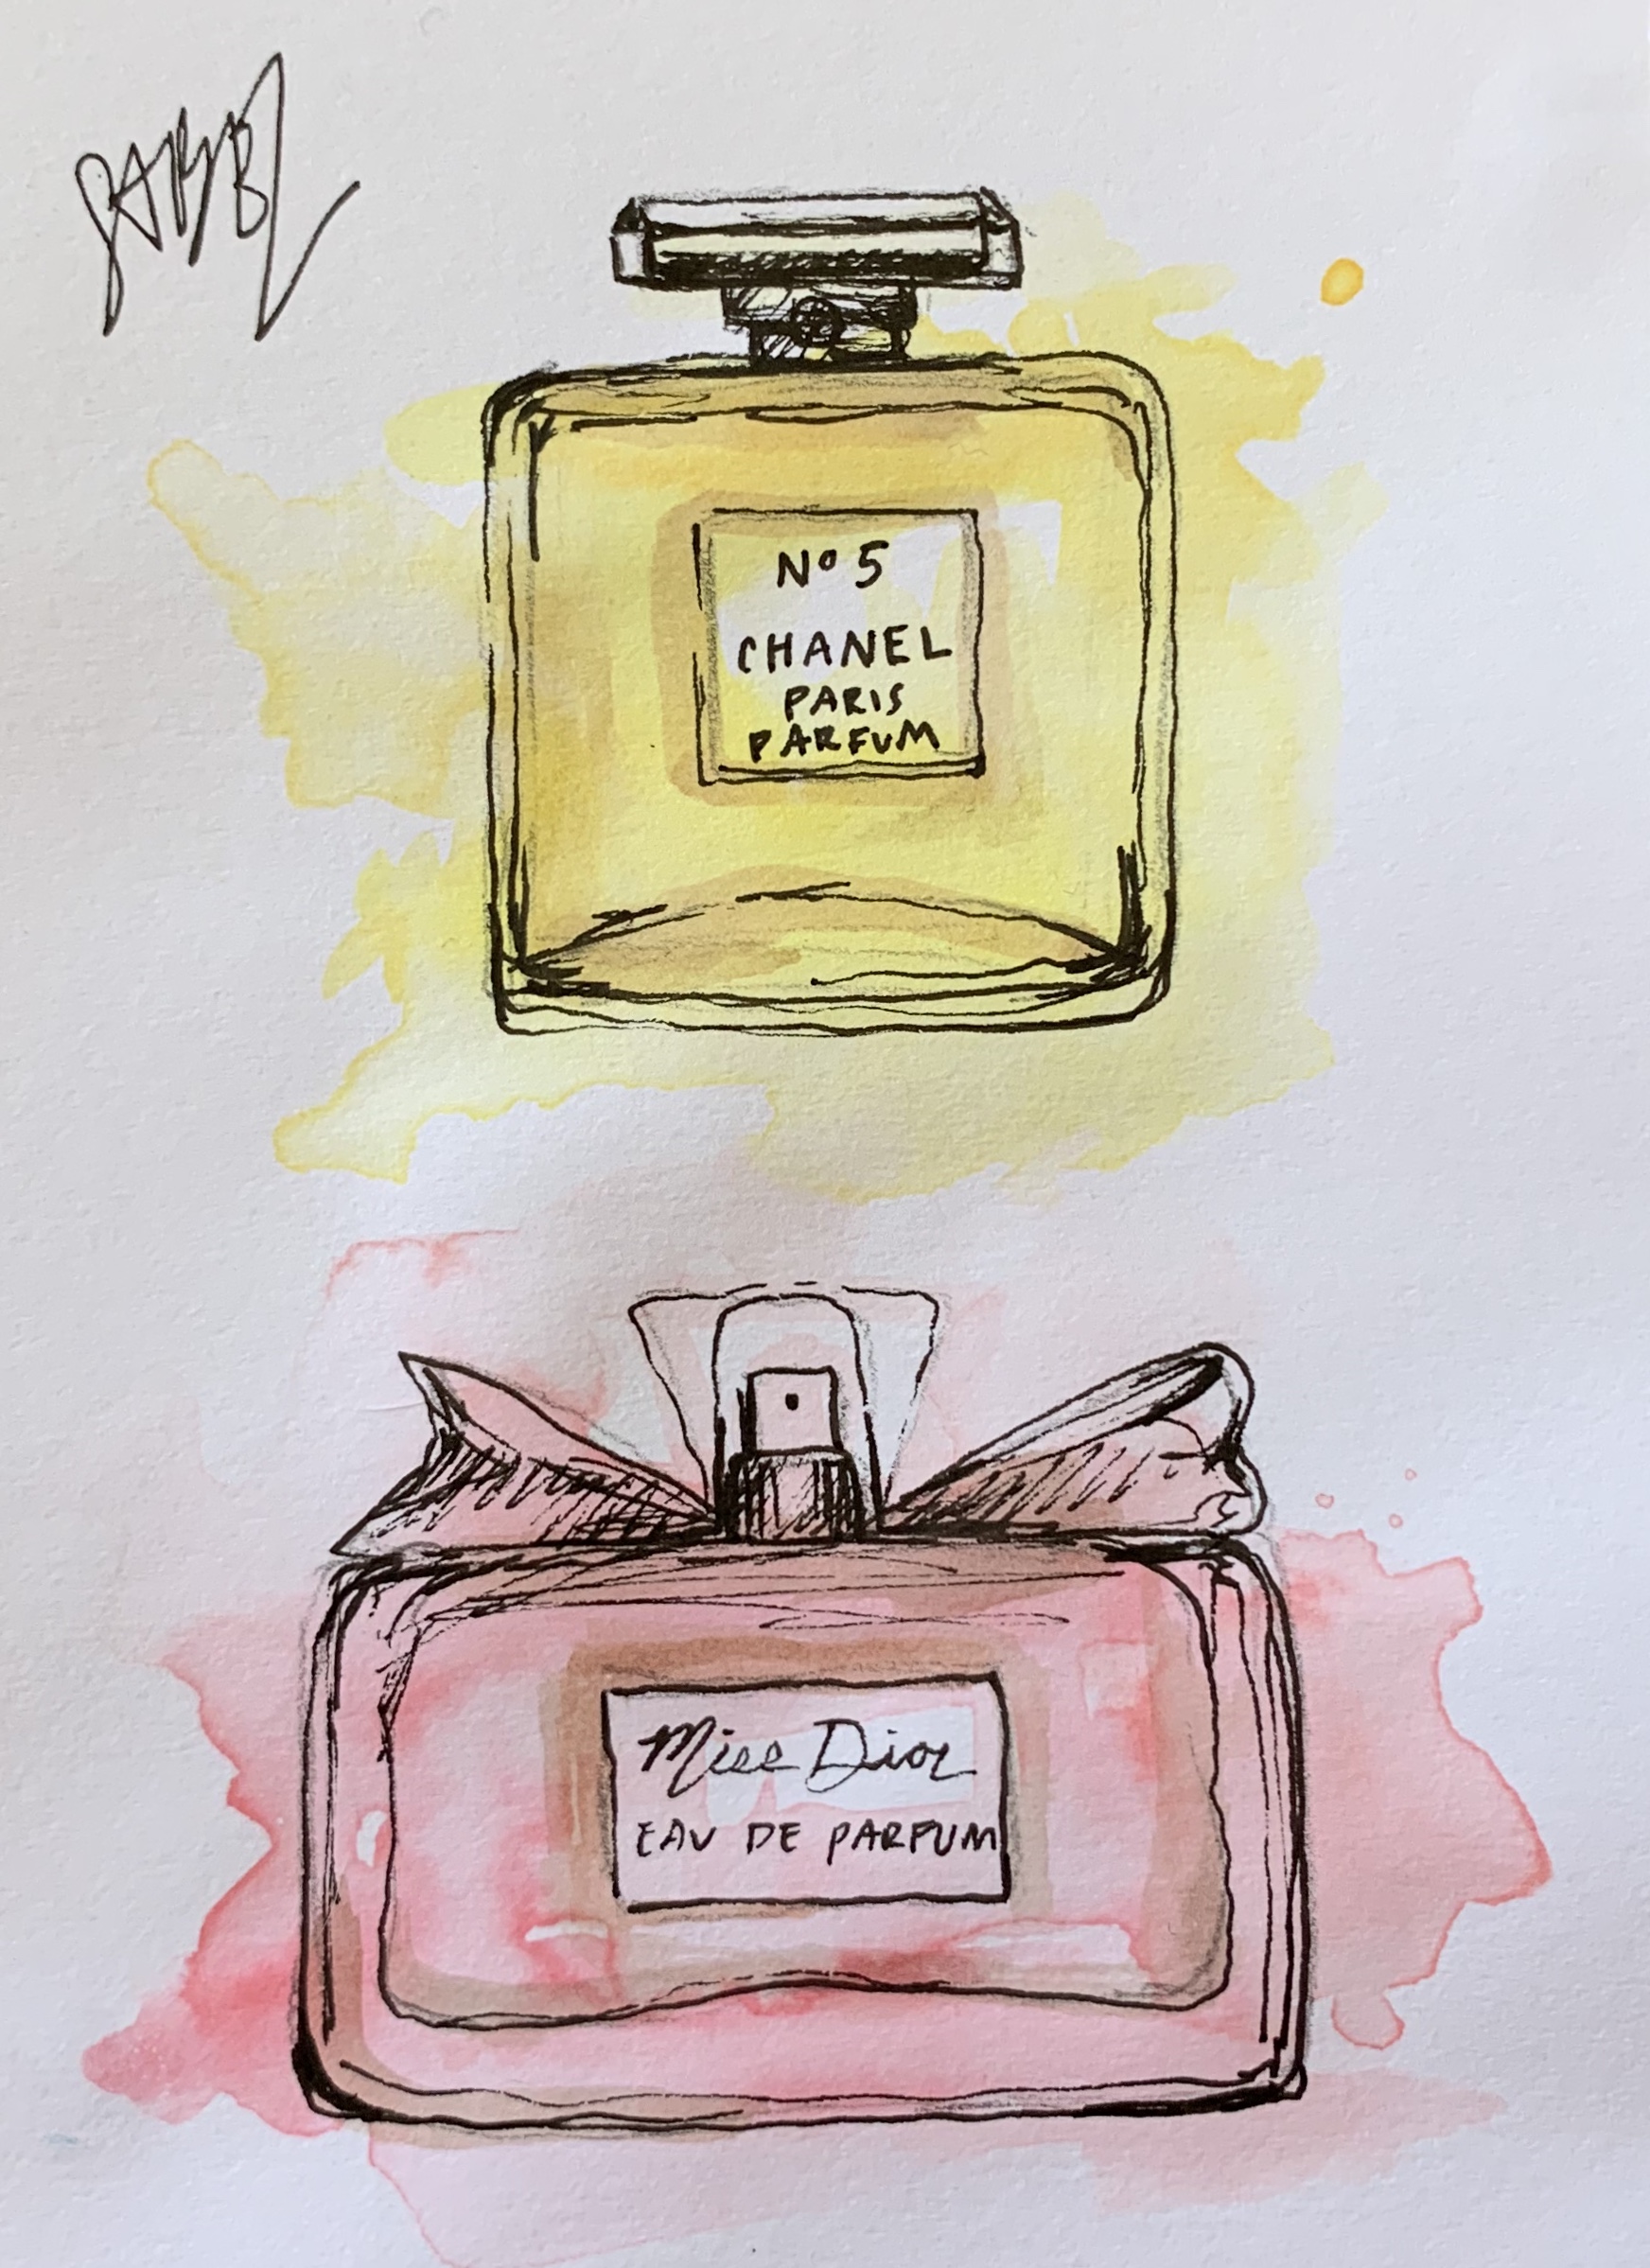 The art of the perfume bottle